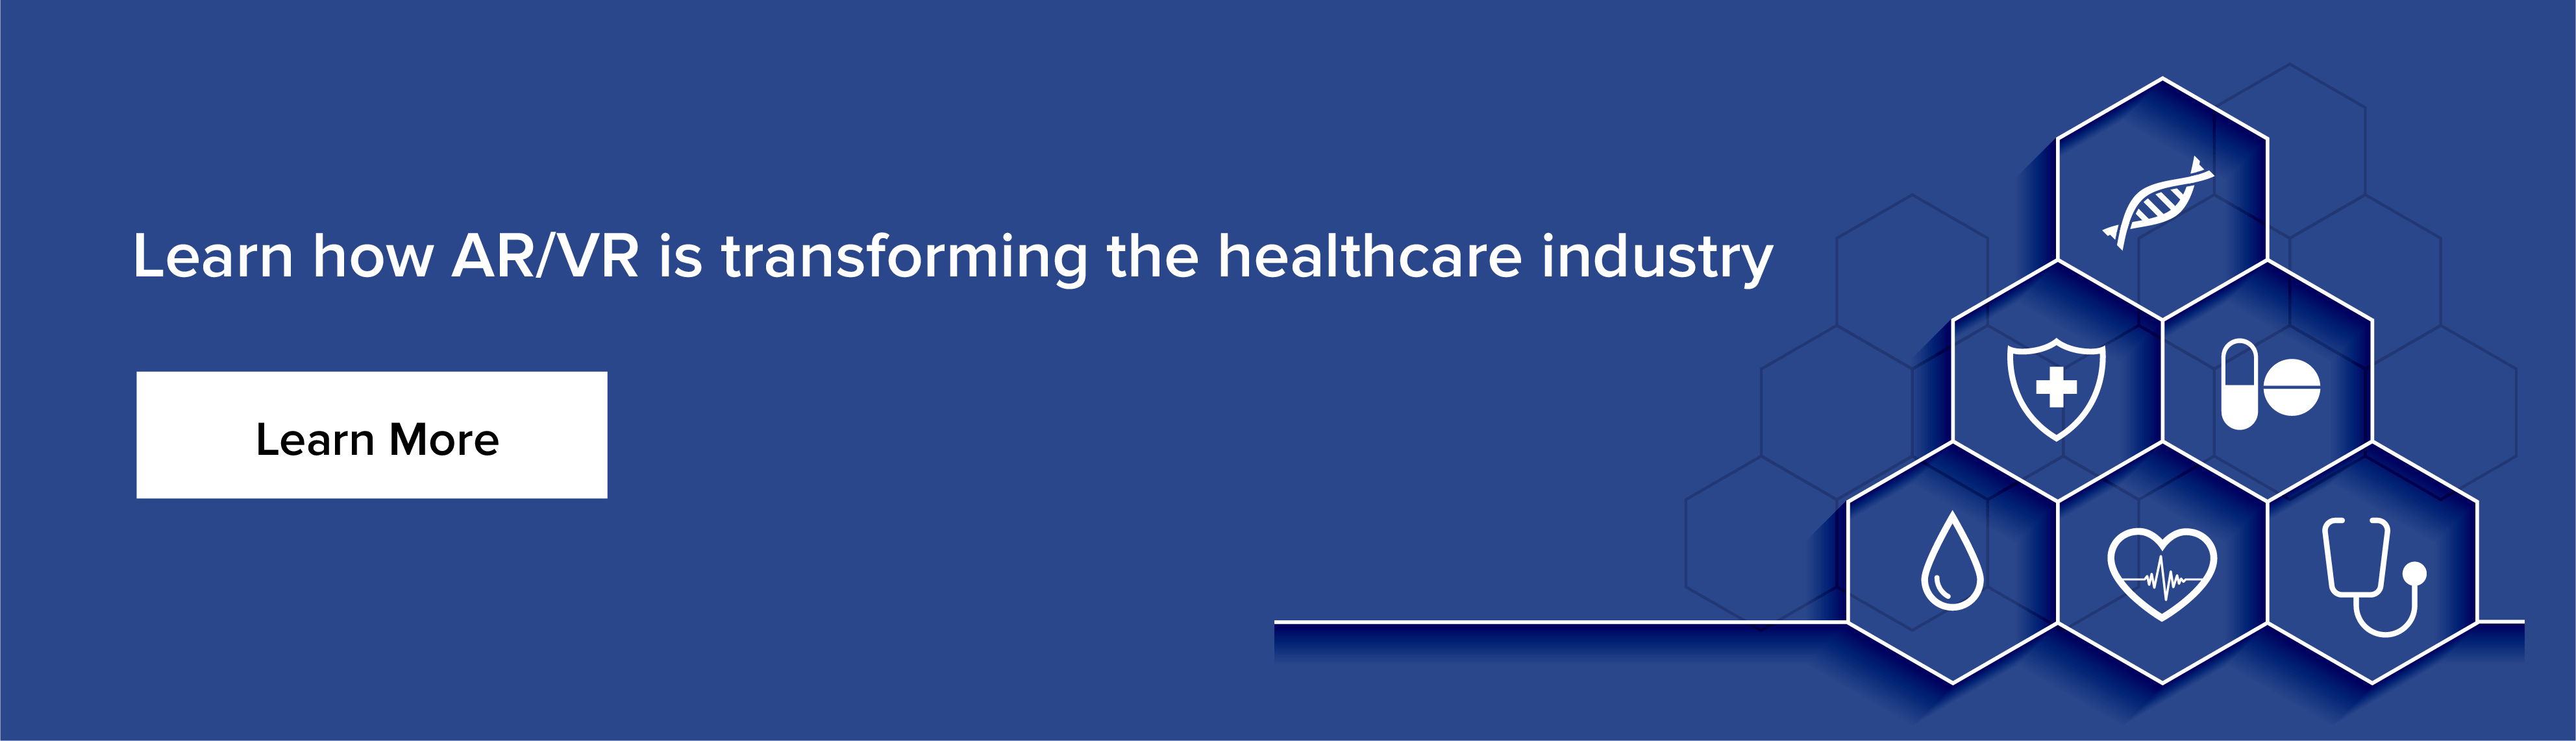 Ar Vr in healthcare industry